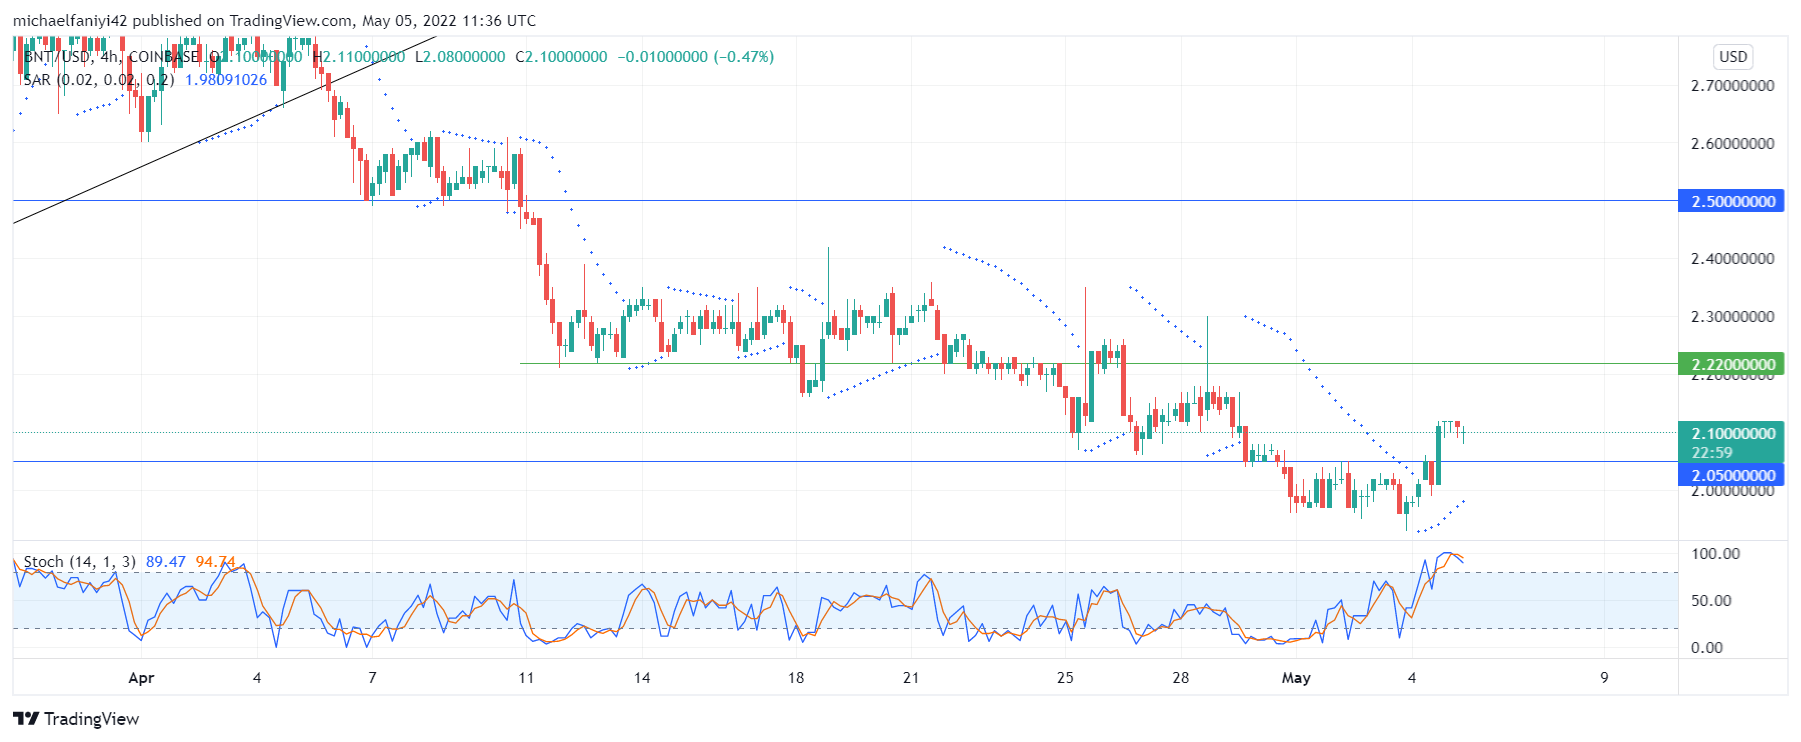 Bancor (BNTUSD) Aims for the $2.880 Resistance Level in Consolidation